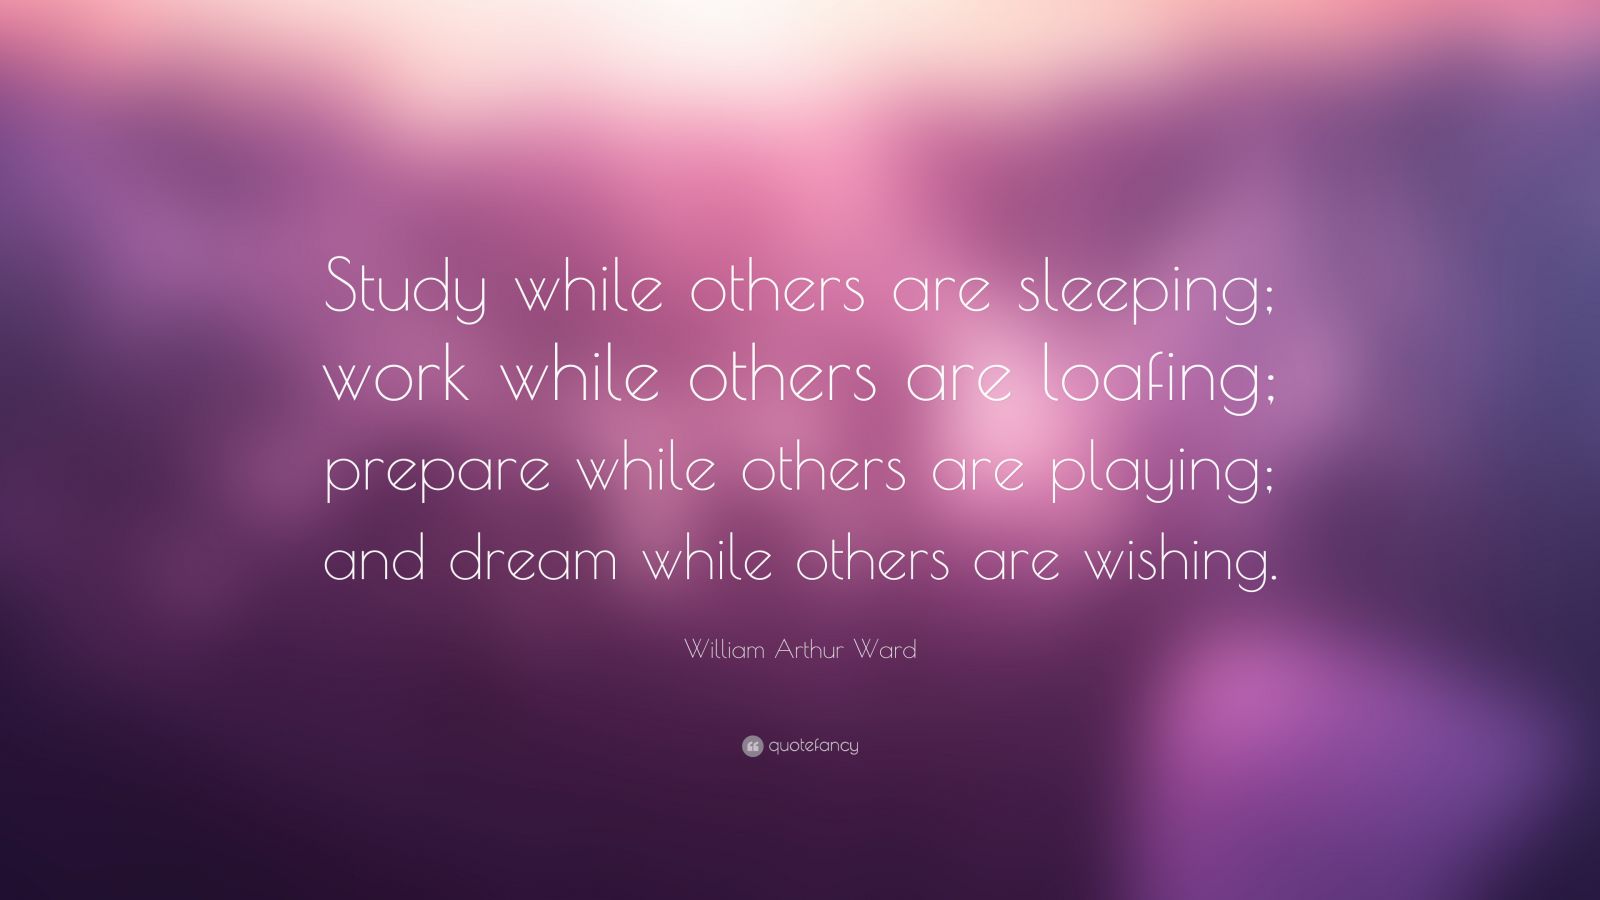 William Arthur Ward Quote: “Study while others are sleeping; work while